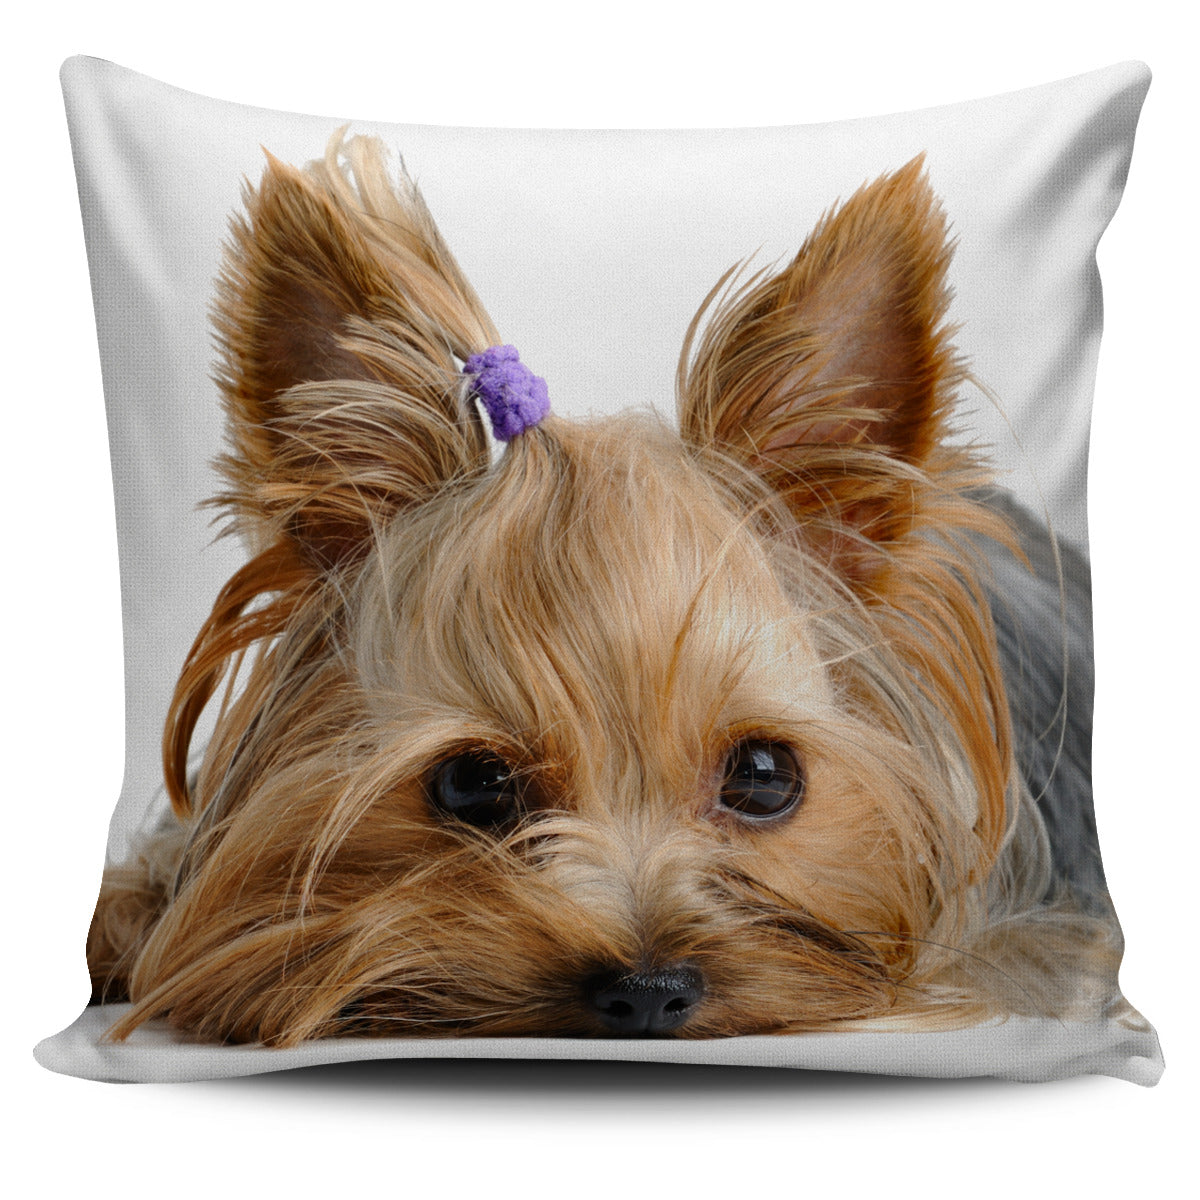 Yorkie Pillow Cover